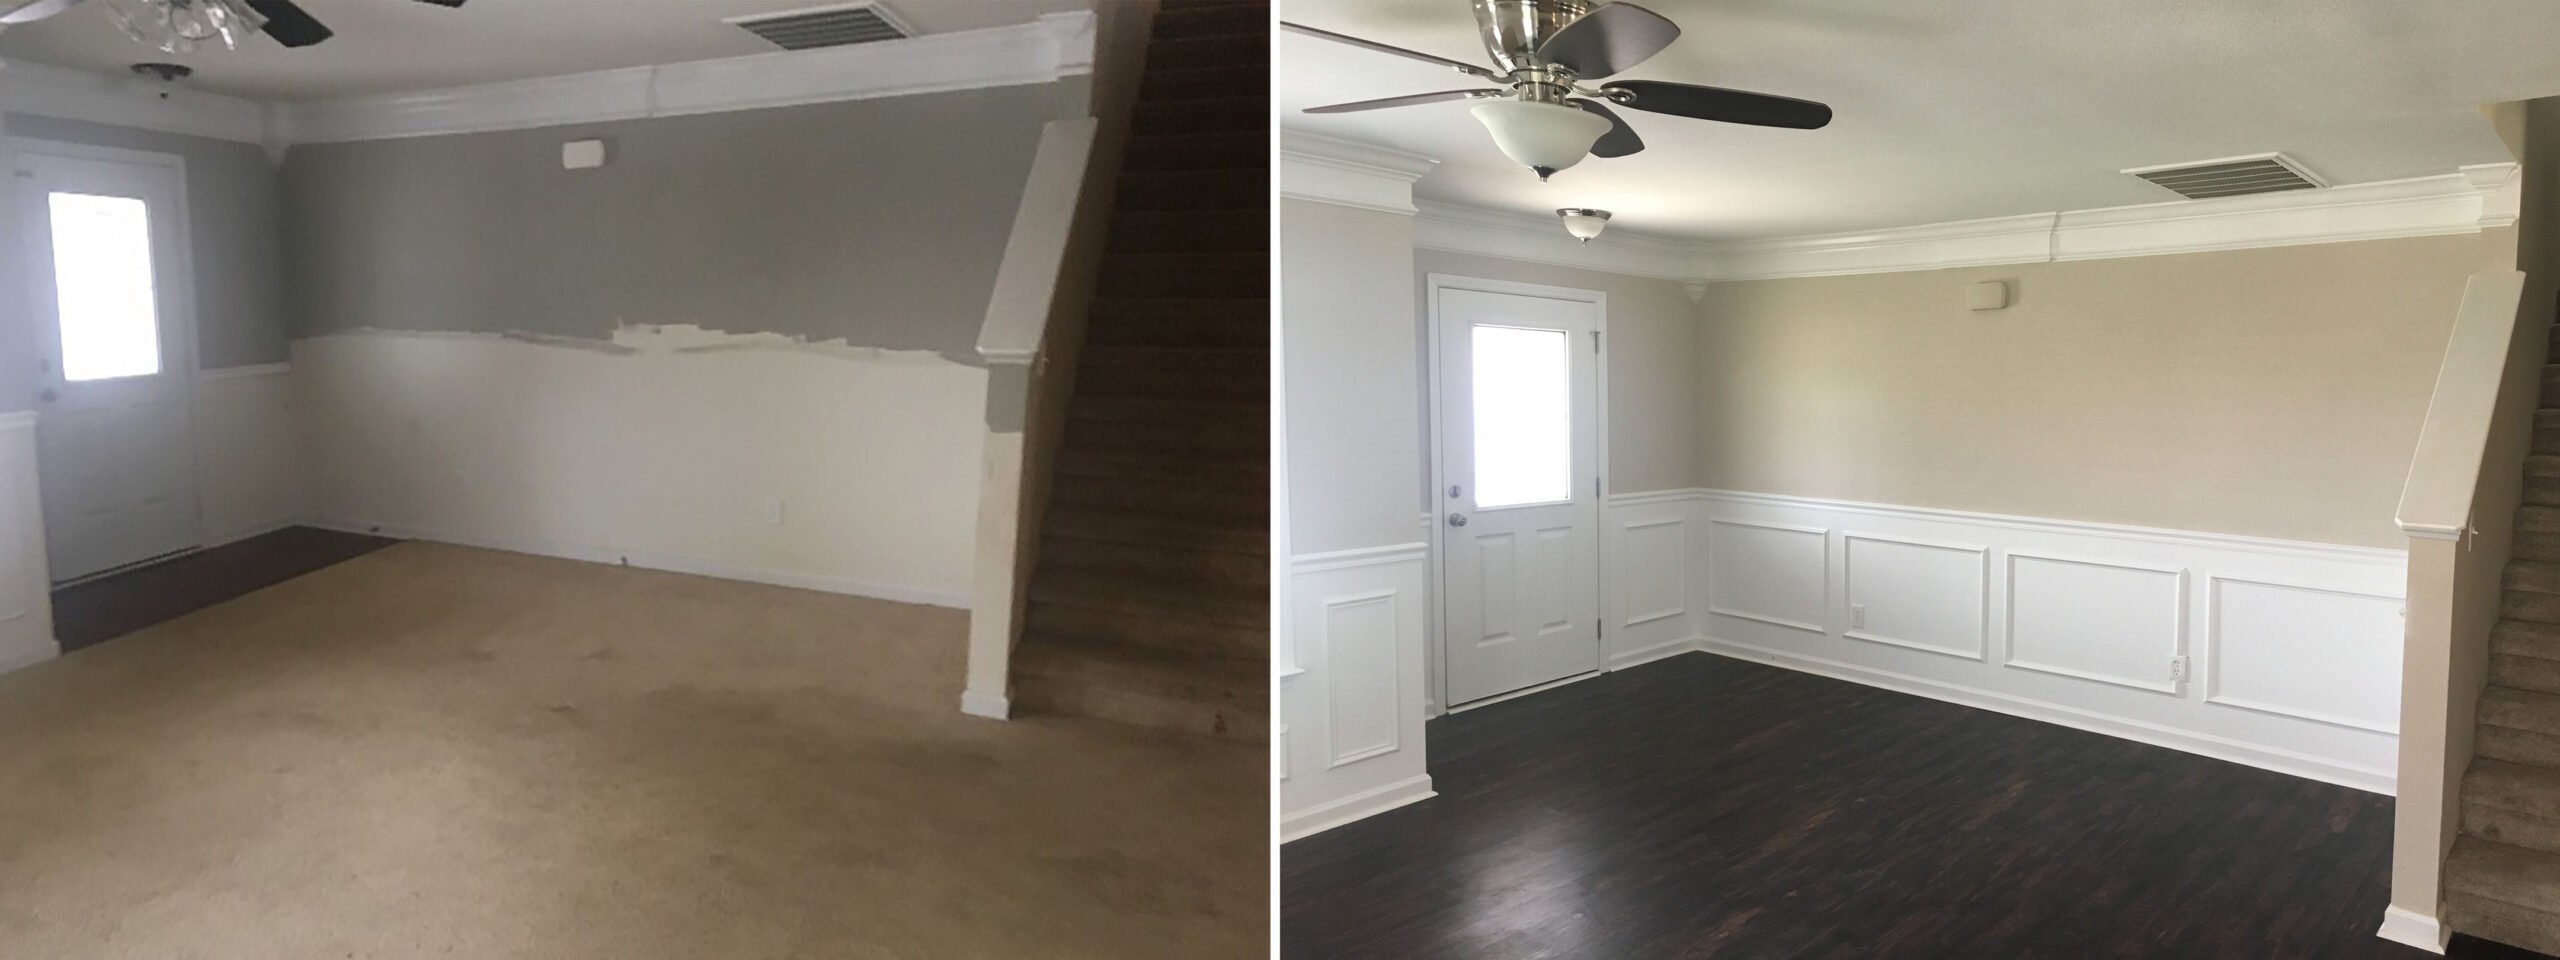 Interior Painting Before and after Living Room